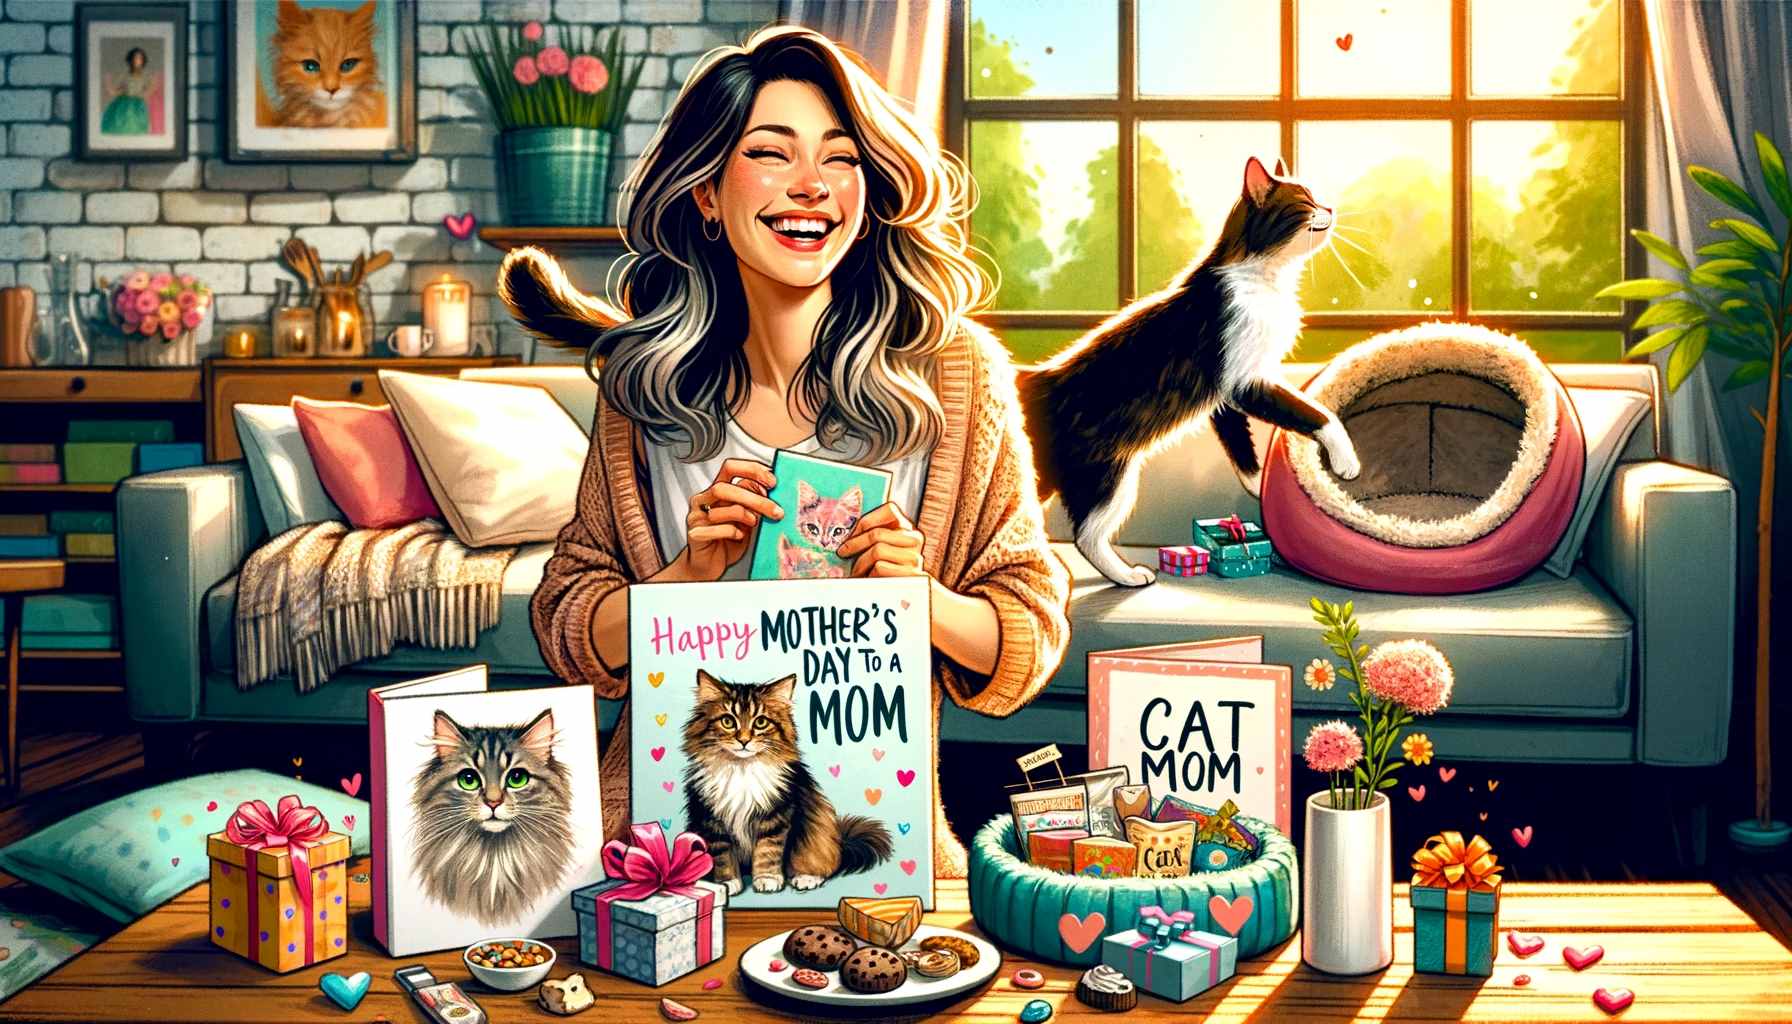 A cheerful scene of a woman opening Mother's Day gifts specifically curated for a cat mom, set in a cozy living room. The woman, in her 30s